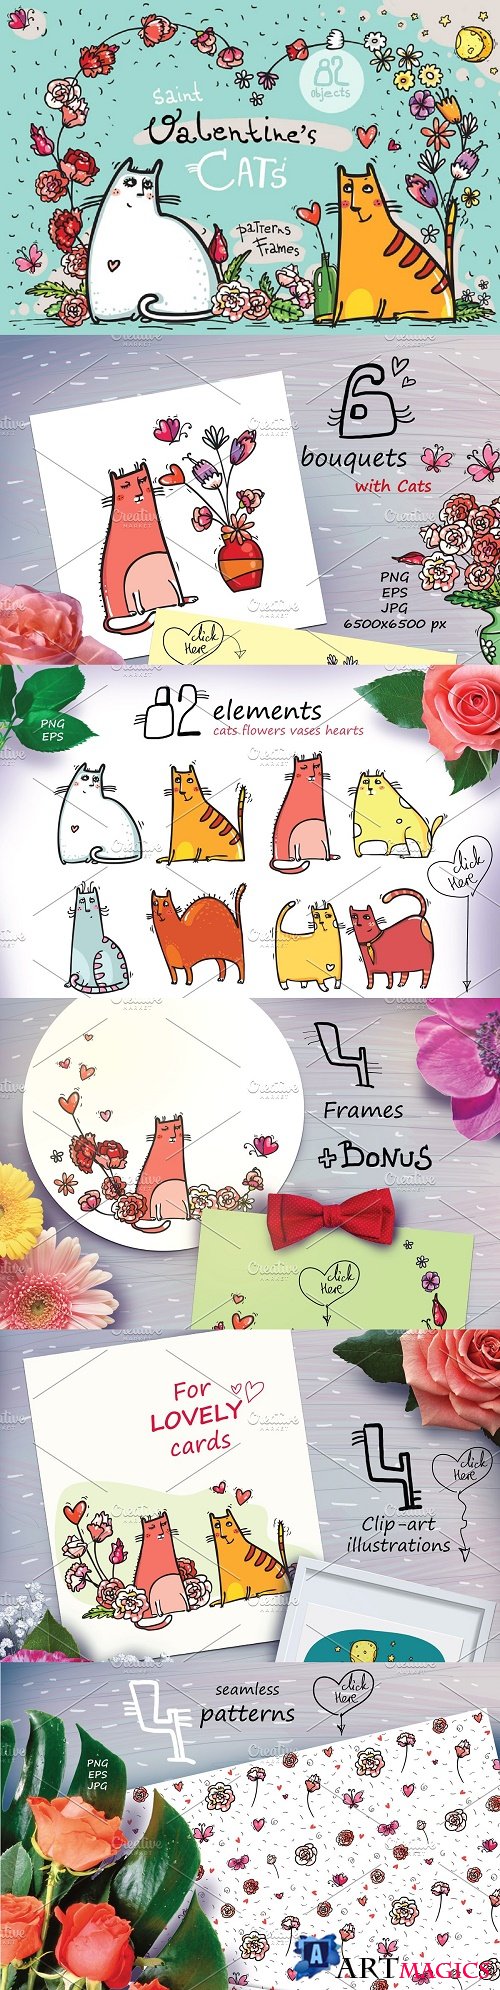 St.Valentine's Cats - 82 elements - 2250515